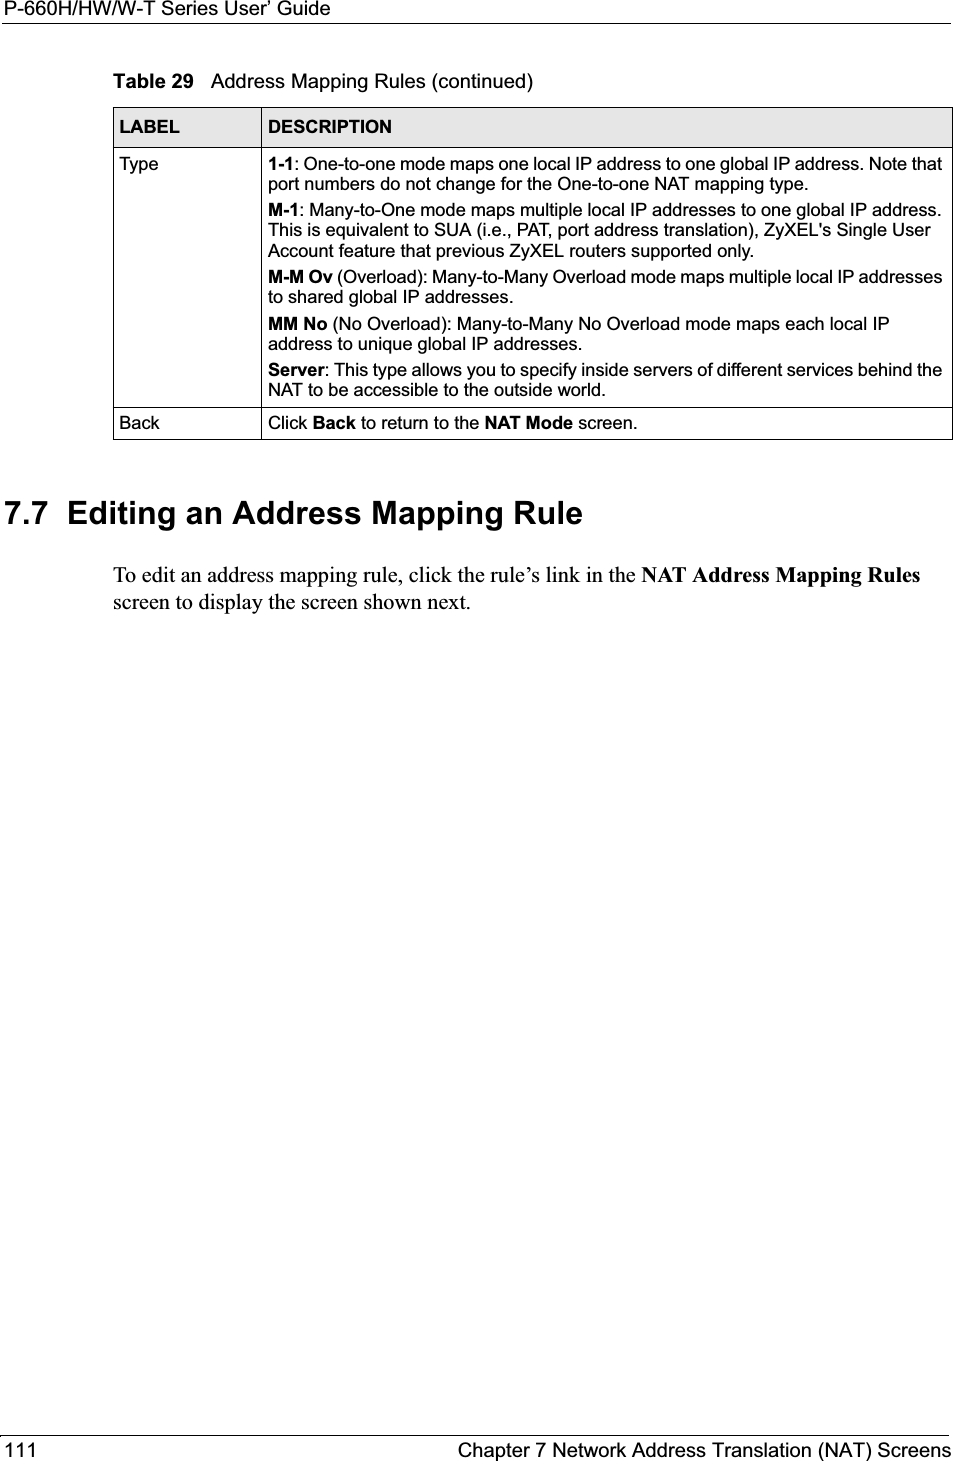 P-660H/HW/W-T Series User’ Guide111 Chapter 7 Network Address Translation (NAT) Screens7.7  Editing an Address Mapping Rule To edit an address mapping rule, click the rule’s link in the NAT Address Mapping Rulesscreen to display the screen shown next.  Type 1-1: One-to-one mode maps one local IP address to one global IP address. Note that port numbers do not change for the One-to-one NAT mapping type. M-1: Many-to-One mode maps multiple local IP addresses to one global IP address. This is equivalent to SUA (i.e., PAT, port address translation), ZyXEL&apos;s Single User Account feature that previous ZyXEL routers supported only. M-M Ov (Overload): Many-to-Many Overload mode maps multiple local IP addresses to shared global IP addresses. MM No (No Overload): Many-to-Many No Overload mode maps each local IP address to unique global IP addresses. Server: This type allows you to specify inside servers of different services behind the NAT to be accessible to the outside world. Back Click Back to return to the NAT Mode screen.Table 29   Address Mapping Rules (continued)LABEL DESCRIPTION